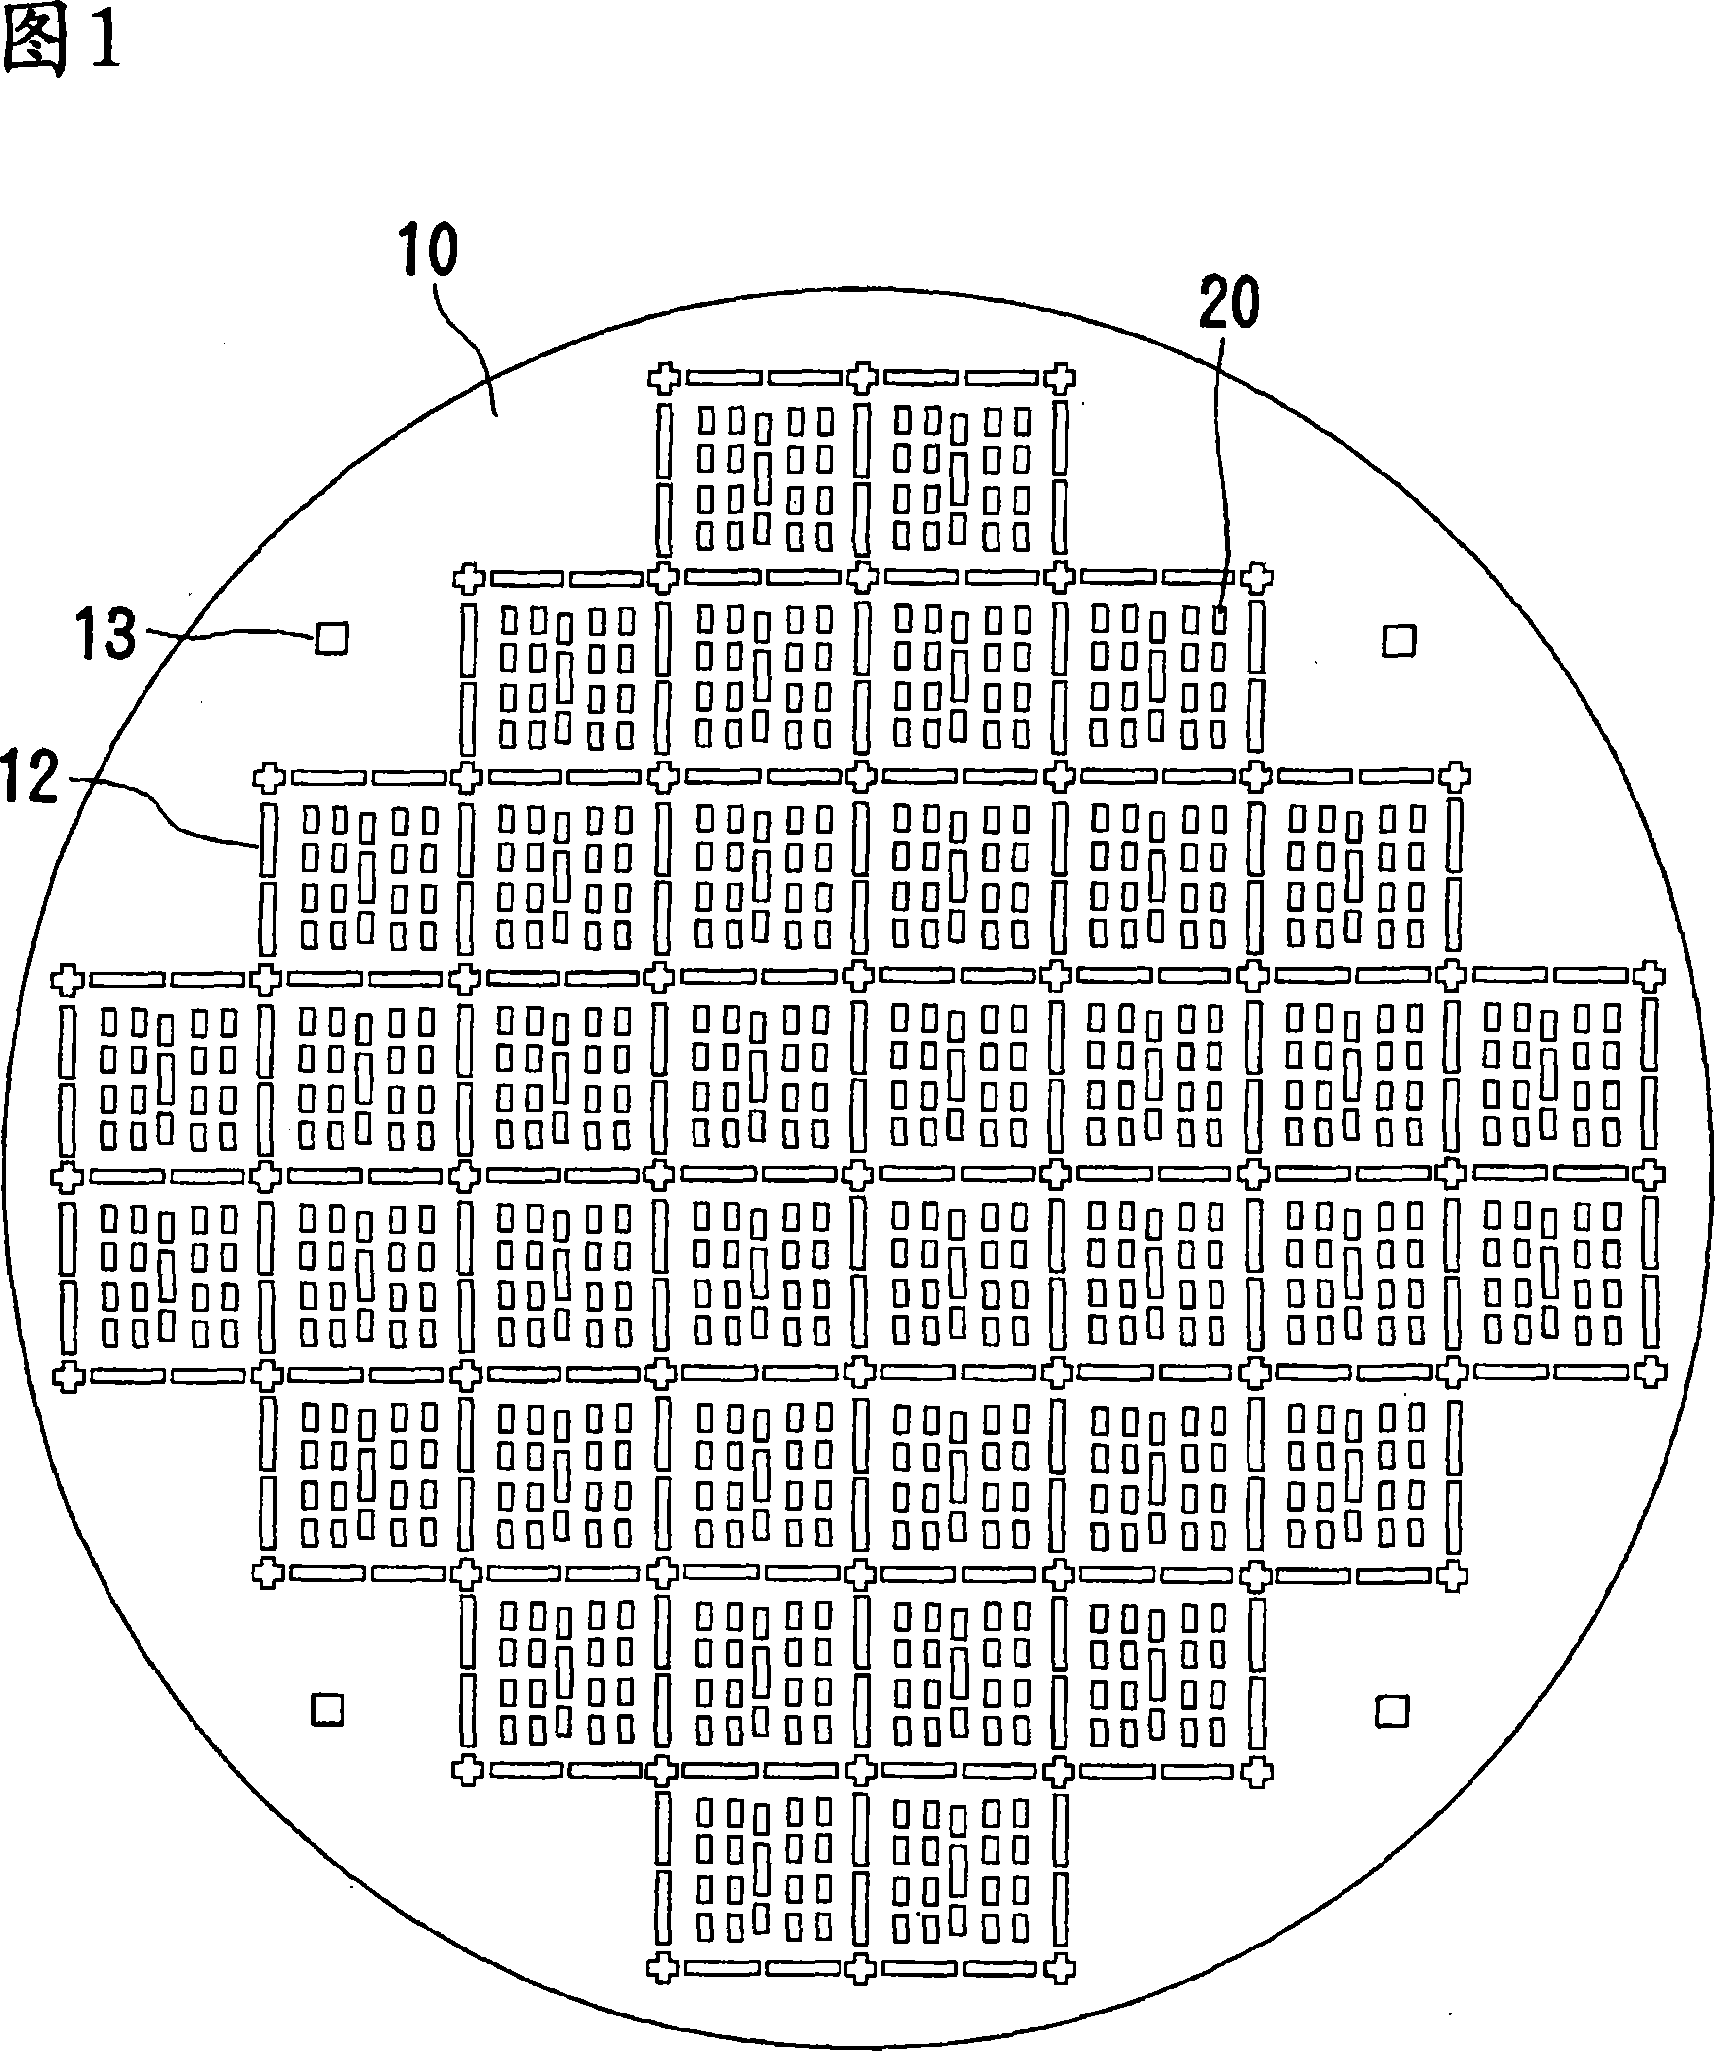 Anisotropic conductive connector for wafer inspection, production method and application therefor